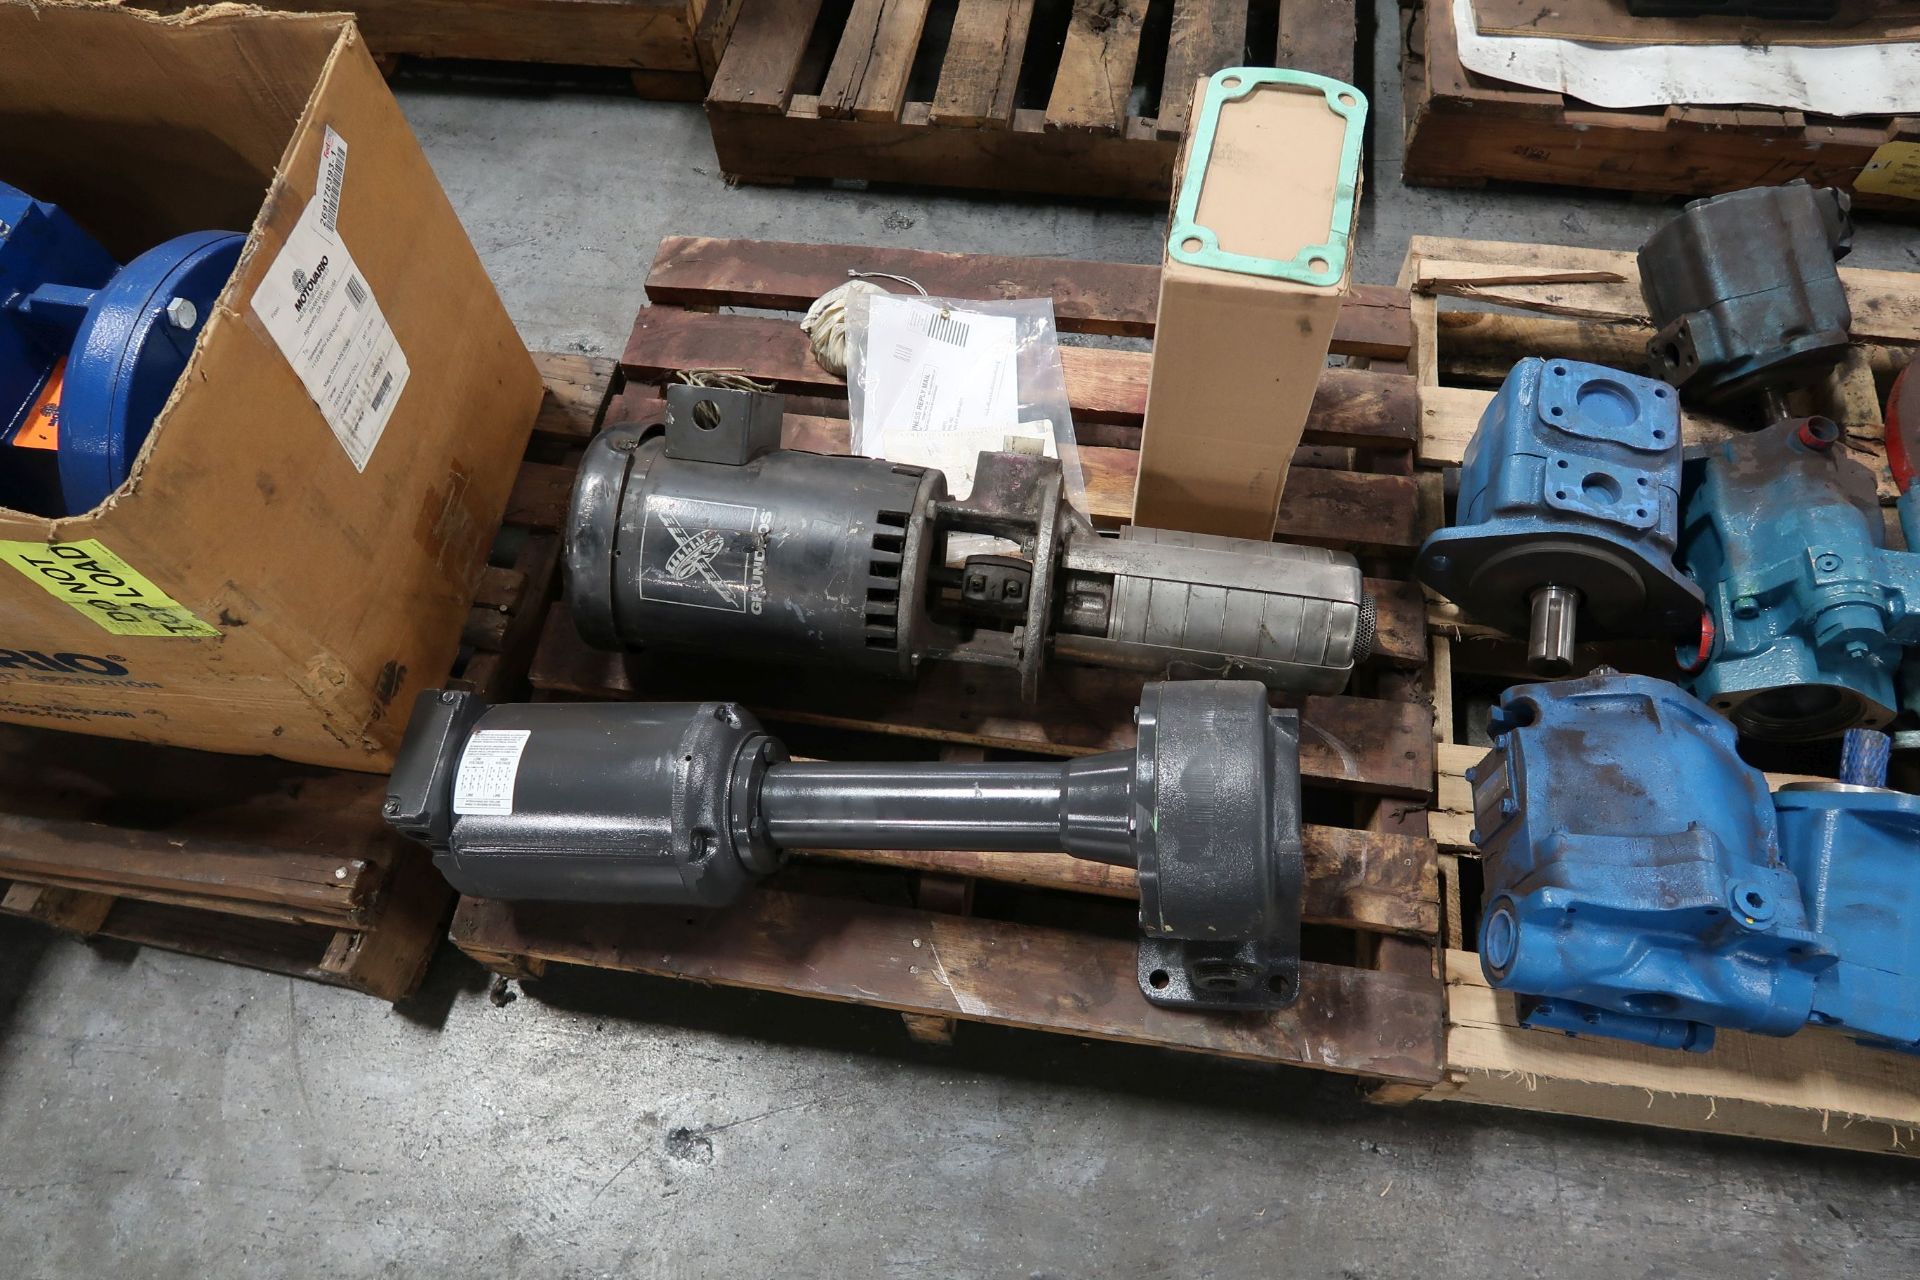 SKIDS PUMPS **LOADING PRICE DUE TO ERRA - $25.00** - Image 4 of 4